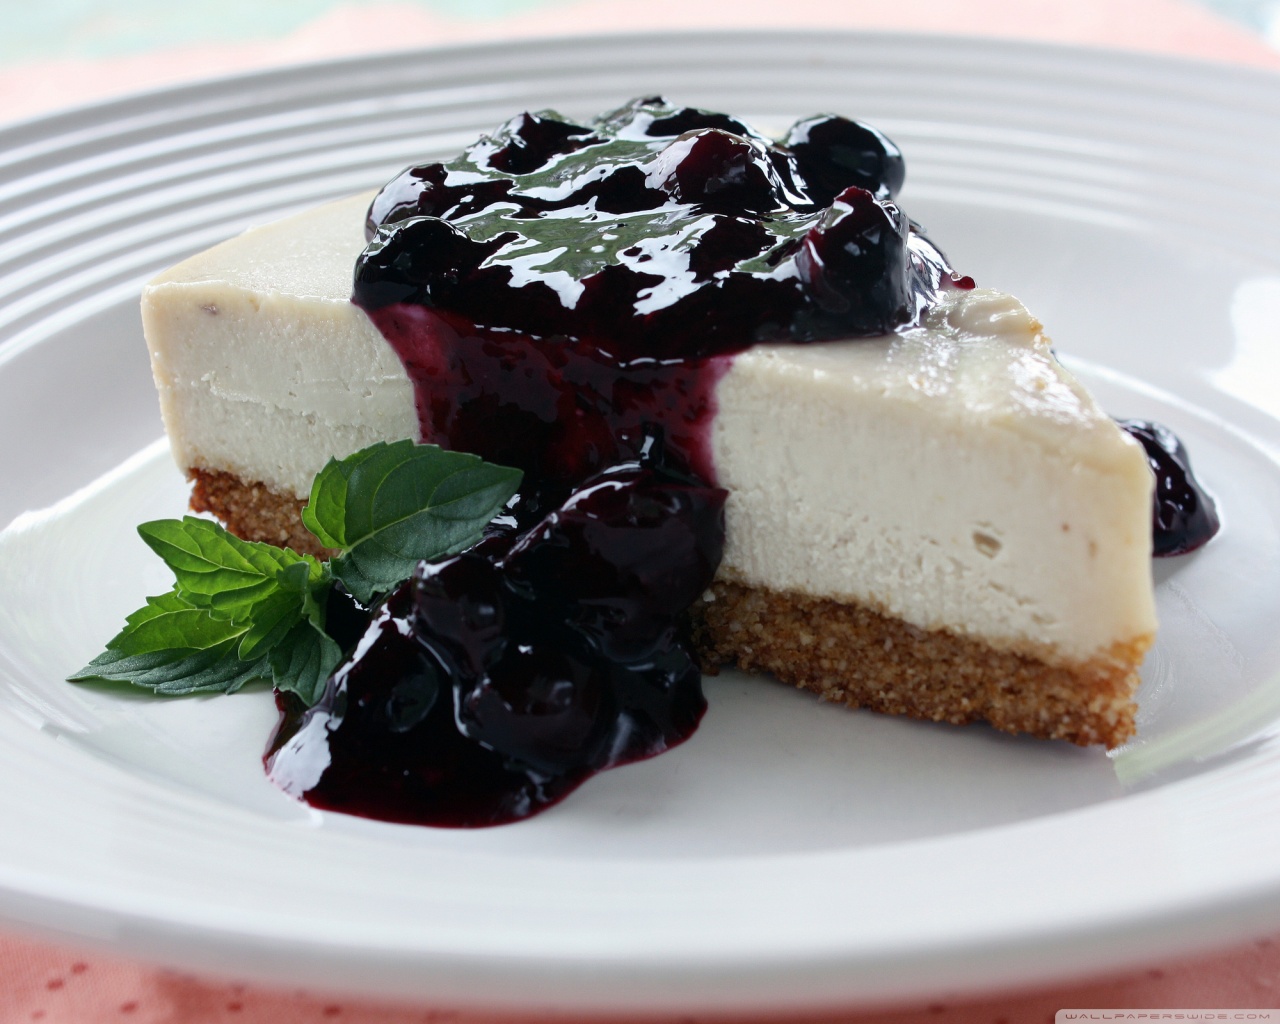 Cheese Cake With Blueberry Sauce 4k HD Desktop Wallpaper For